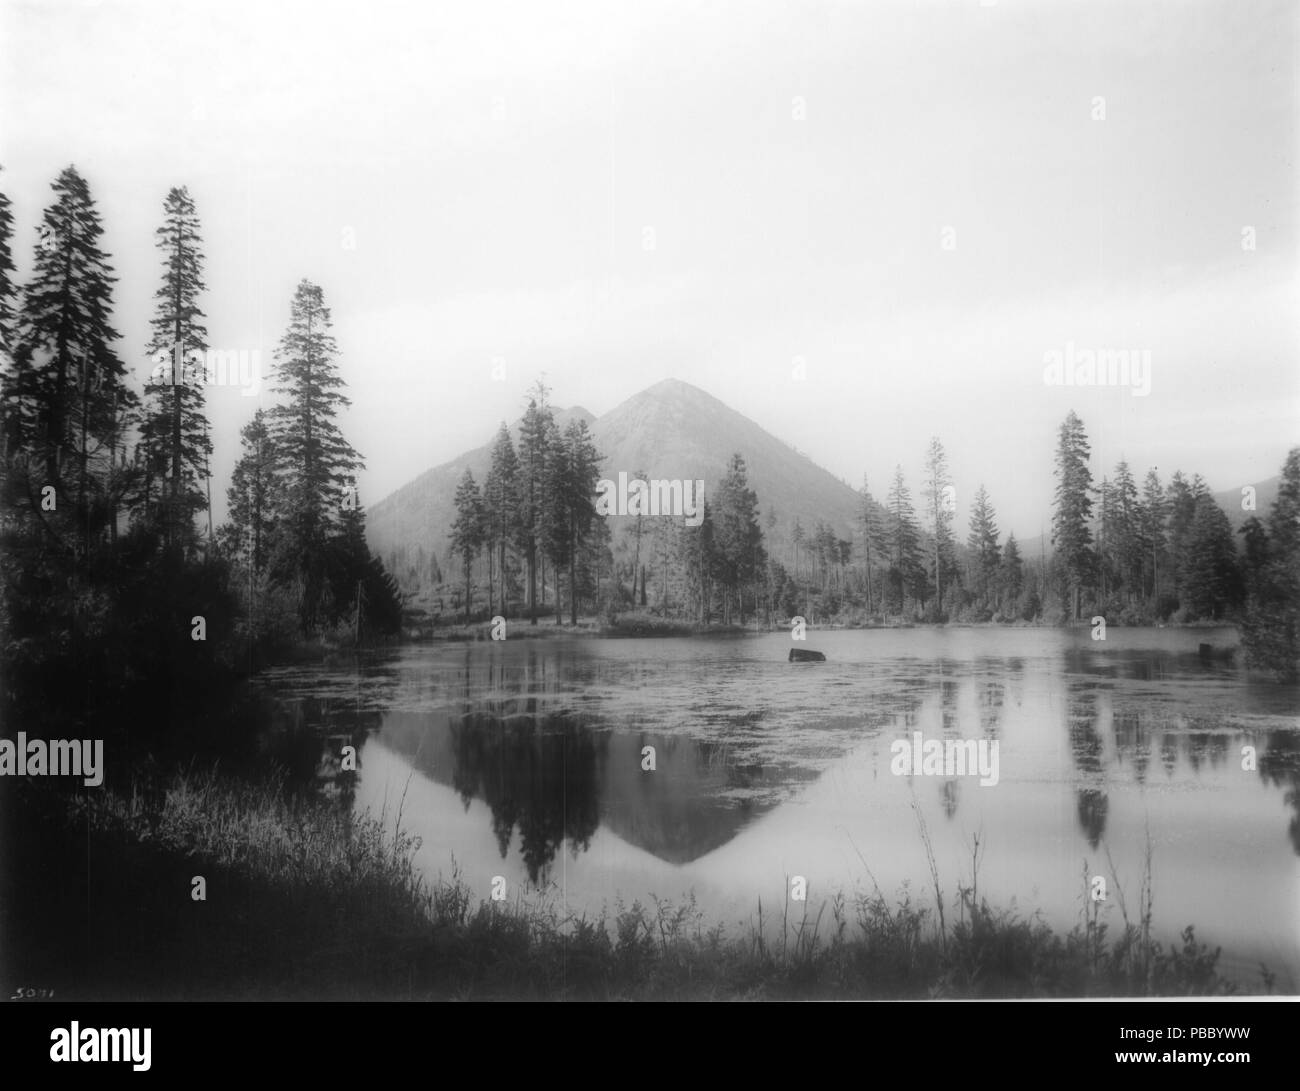 . English: Panoramic view of Black Butte overlooking a lake, Siskiyou County, California, ca.1900-1950 Photograph of a panoramic view of Black Butte overlooking Summit Lake(?), Siskiyou County, California, ca.1900-1950. Silhouettes of the mountain and the surrounding trees are reflected in the lake. Water vegetation sparsely covers the lake. A large boulder(?) juts above the surface of the water in the middle of the lake. Trees, bushes and grass surround the lake. A wooden fence encloses a short circumference of the lake on the other side. Utility lines and poles run along the fence.; 'Summit  Stock Photo